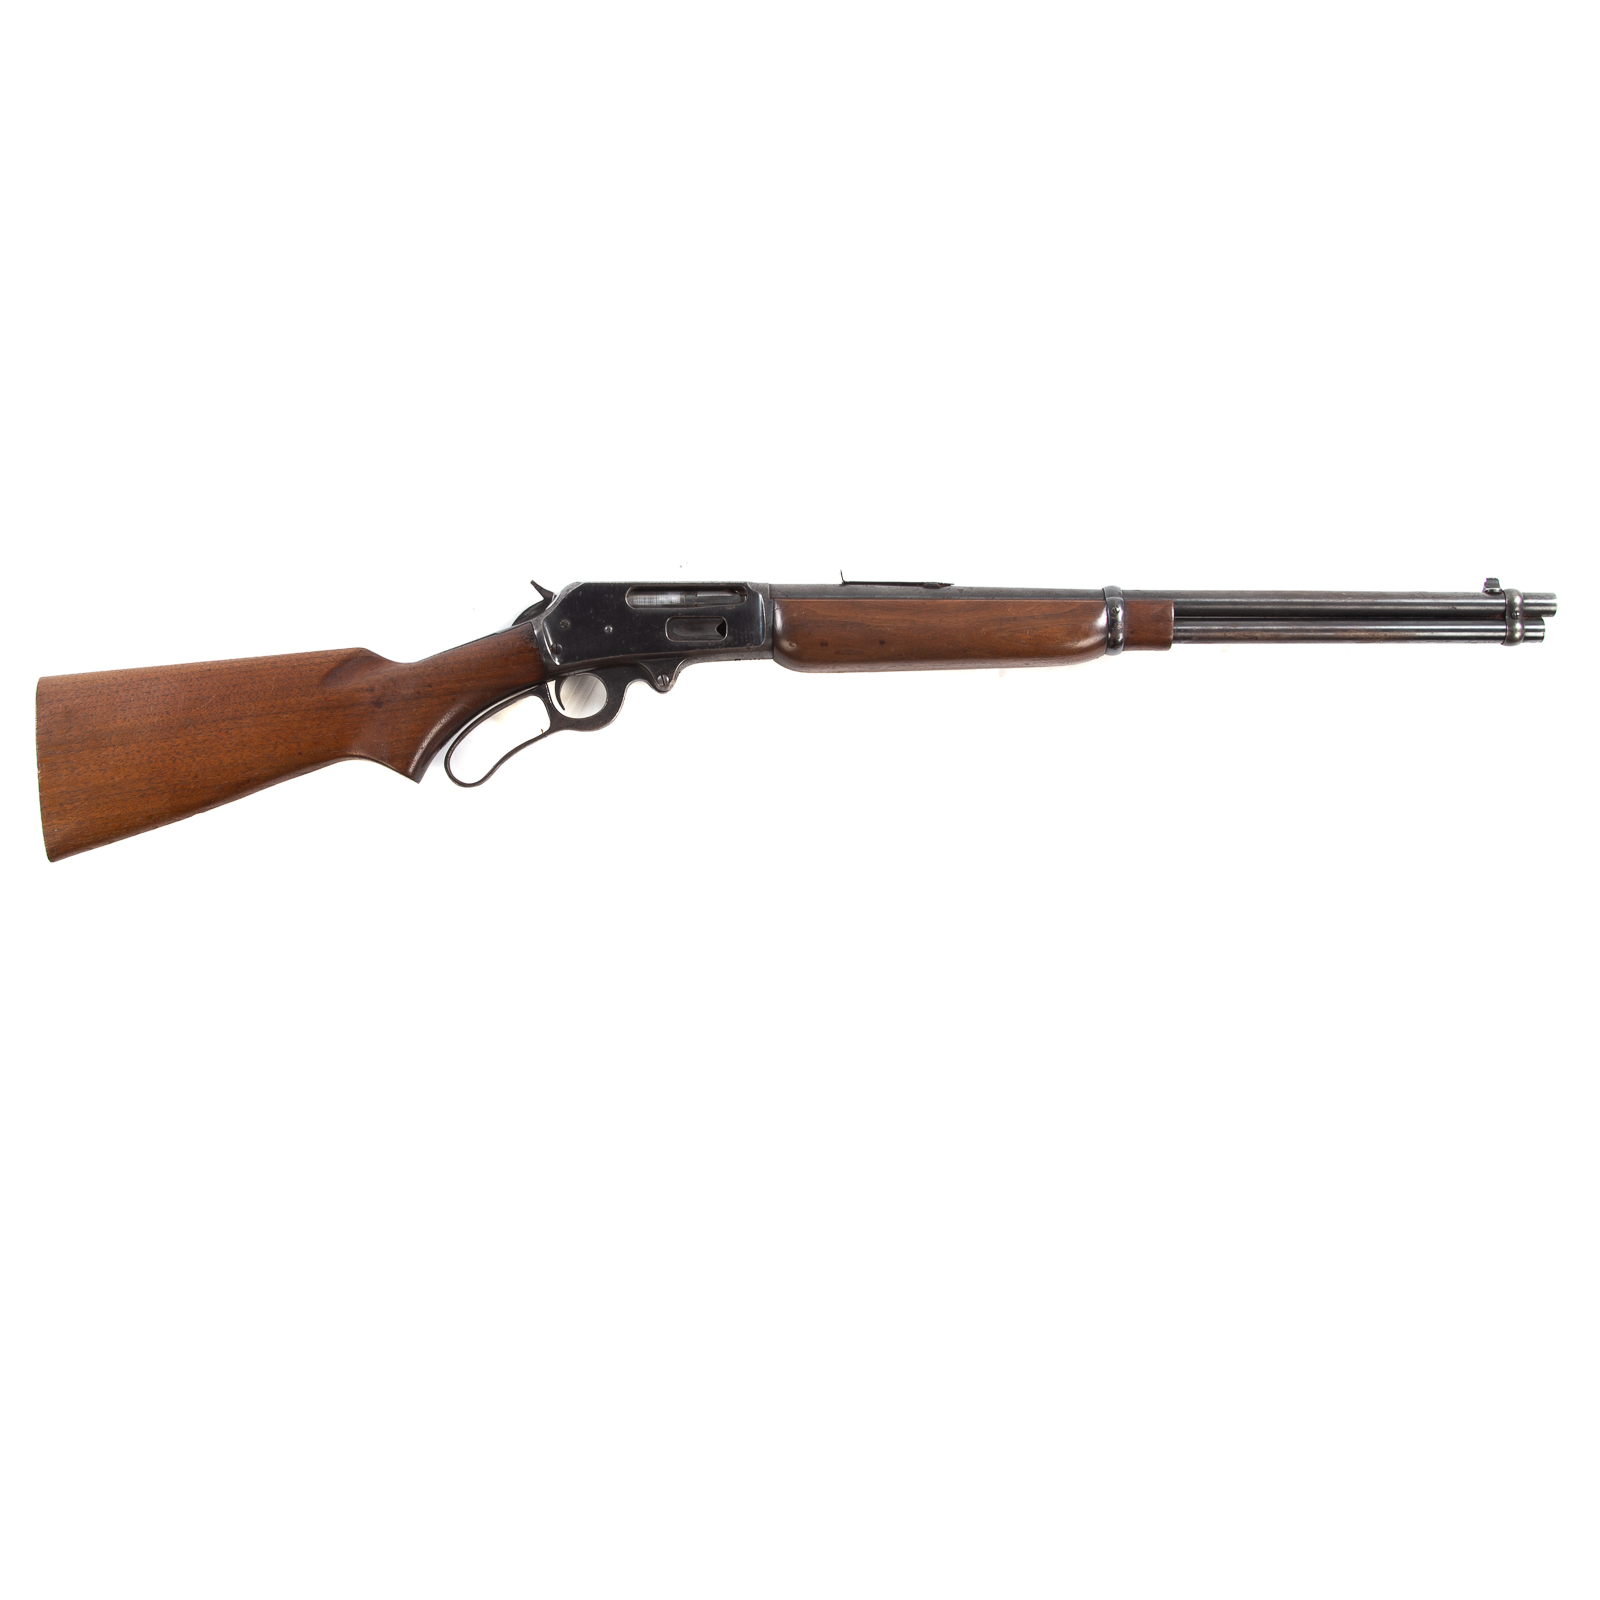 MARLIN MODEL 336 LEVER ACTION RIFLE